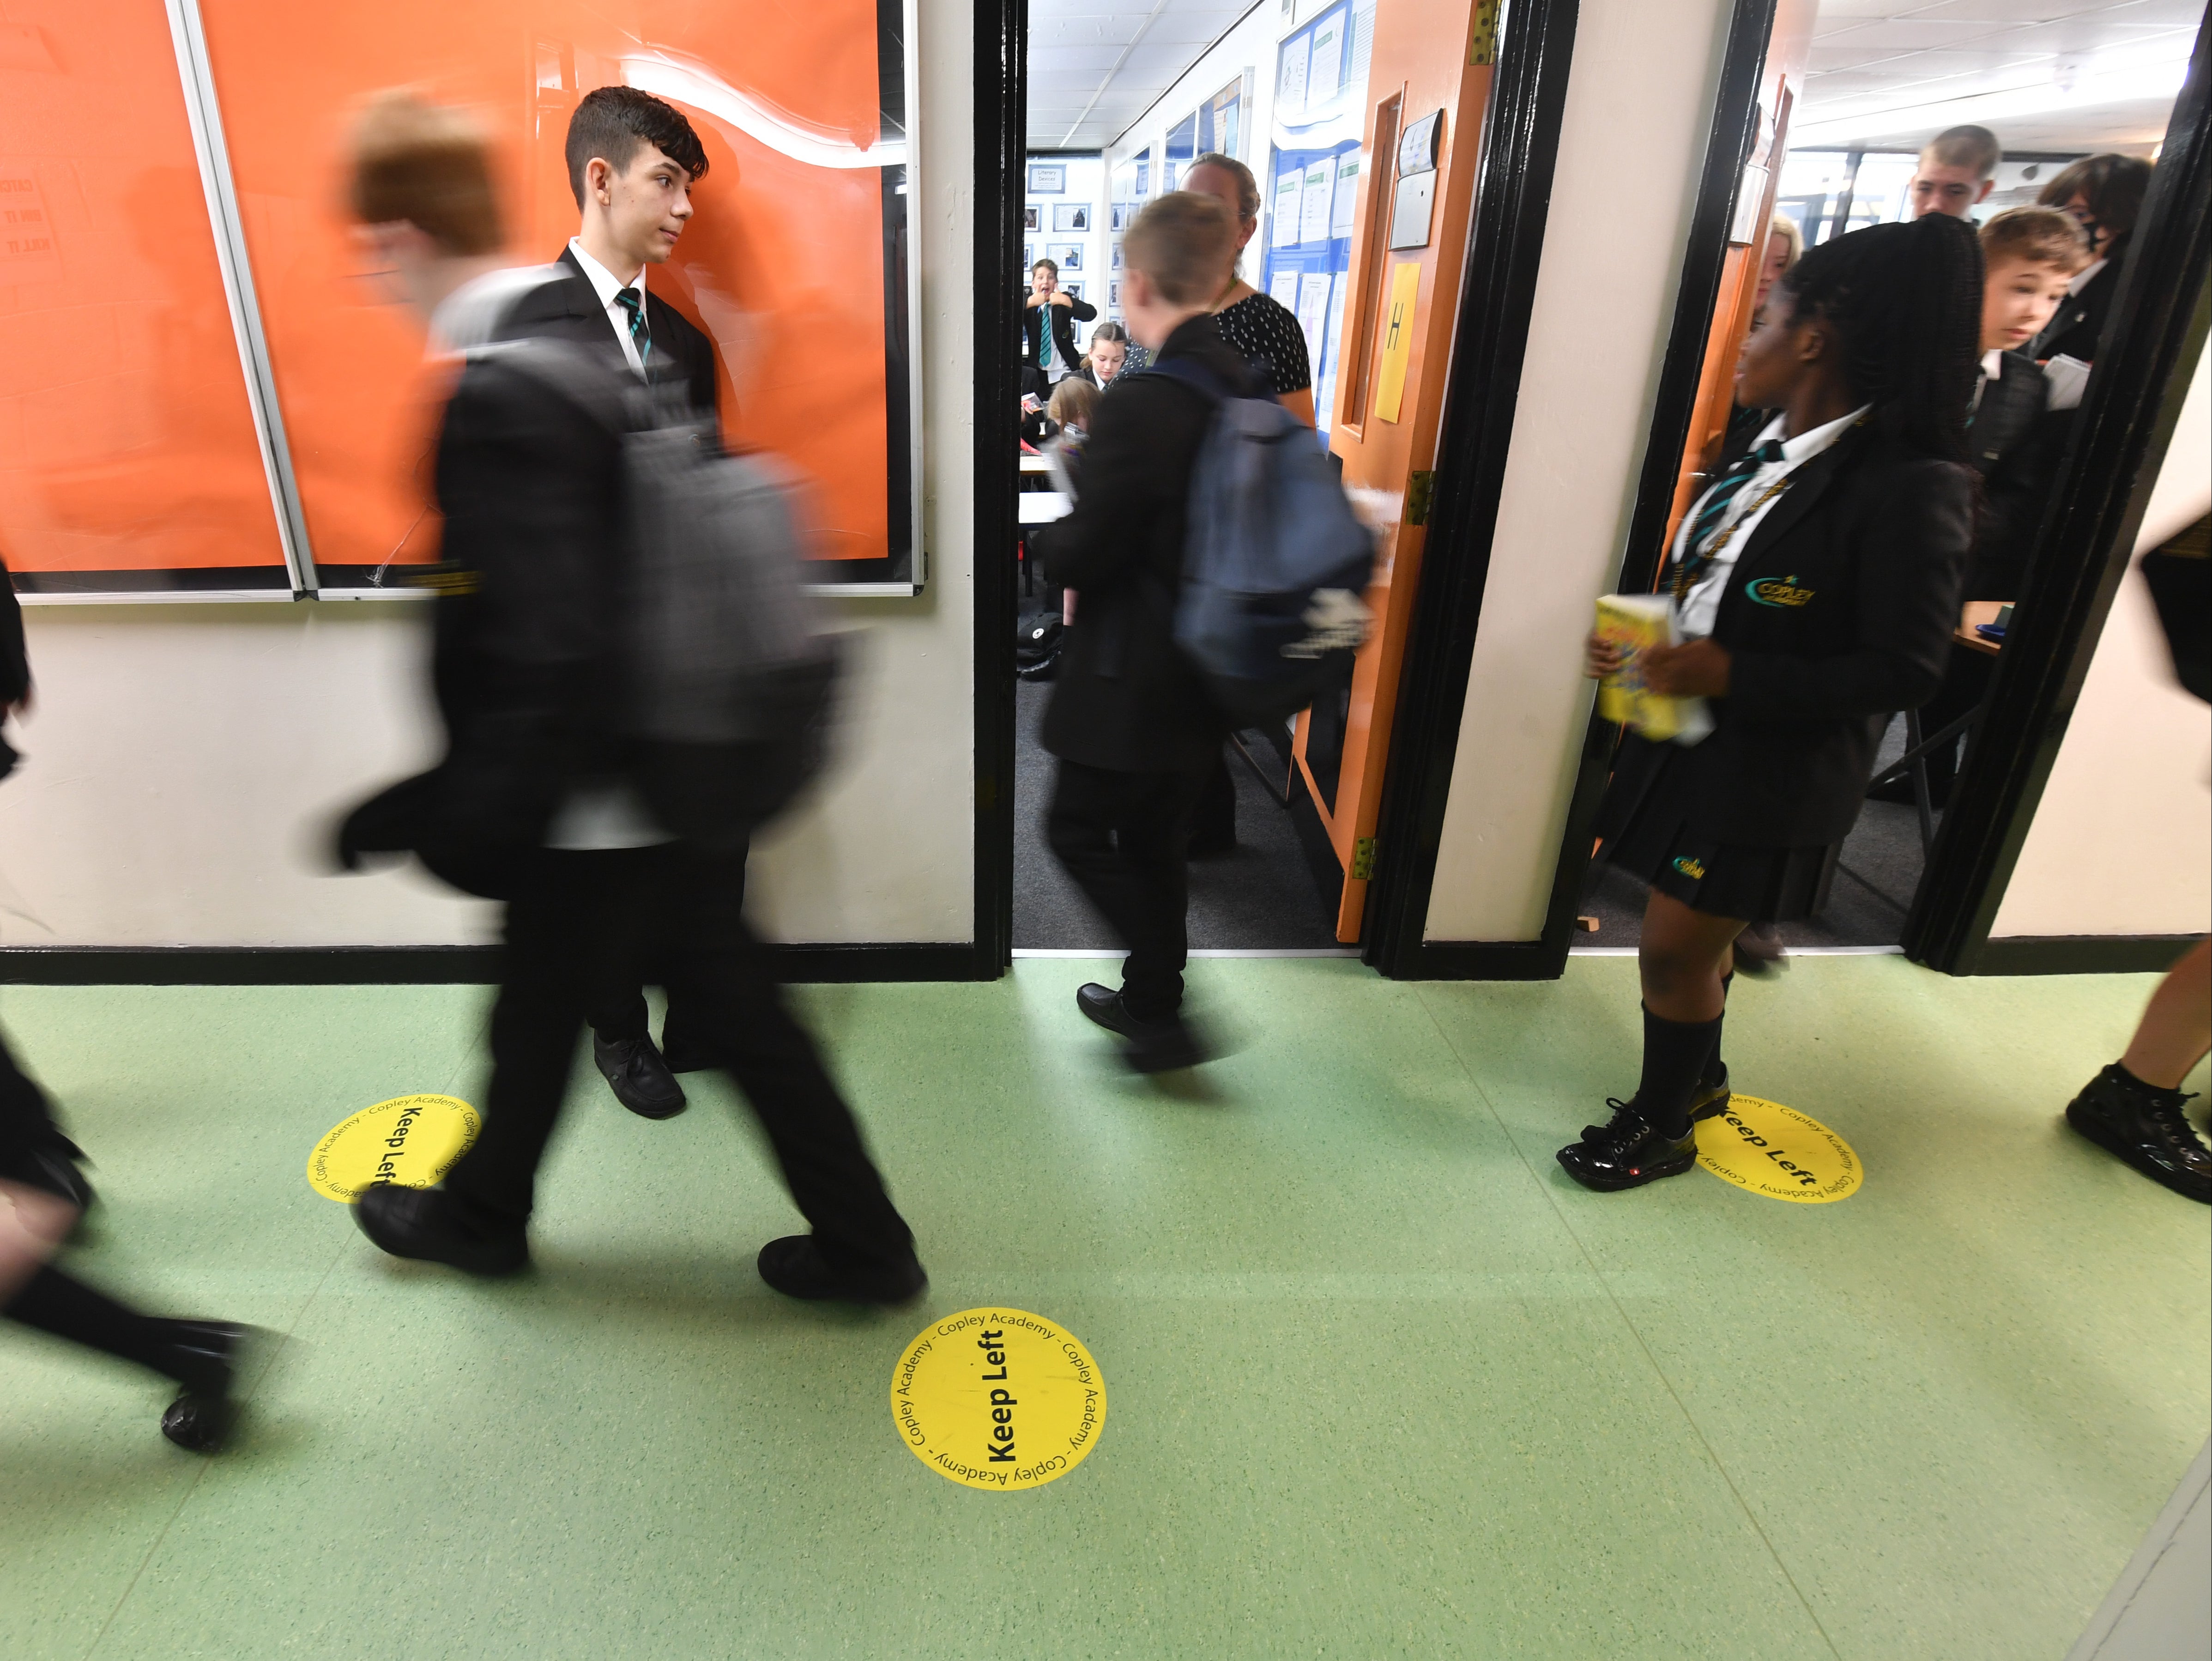 More than 100,000 children were off school last week with confirmed or suspected Covid, government figures show